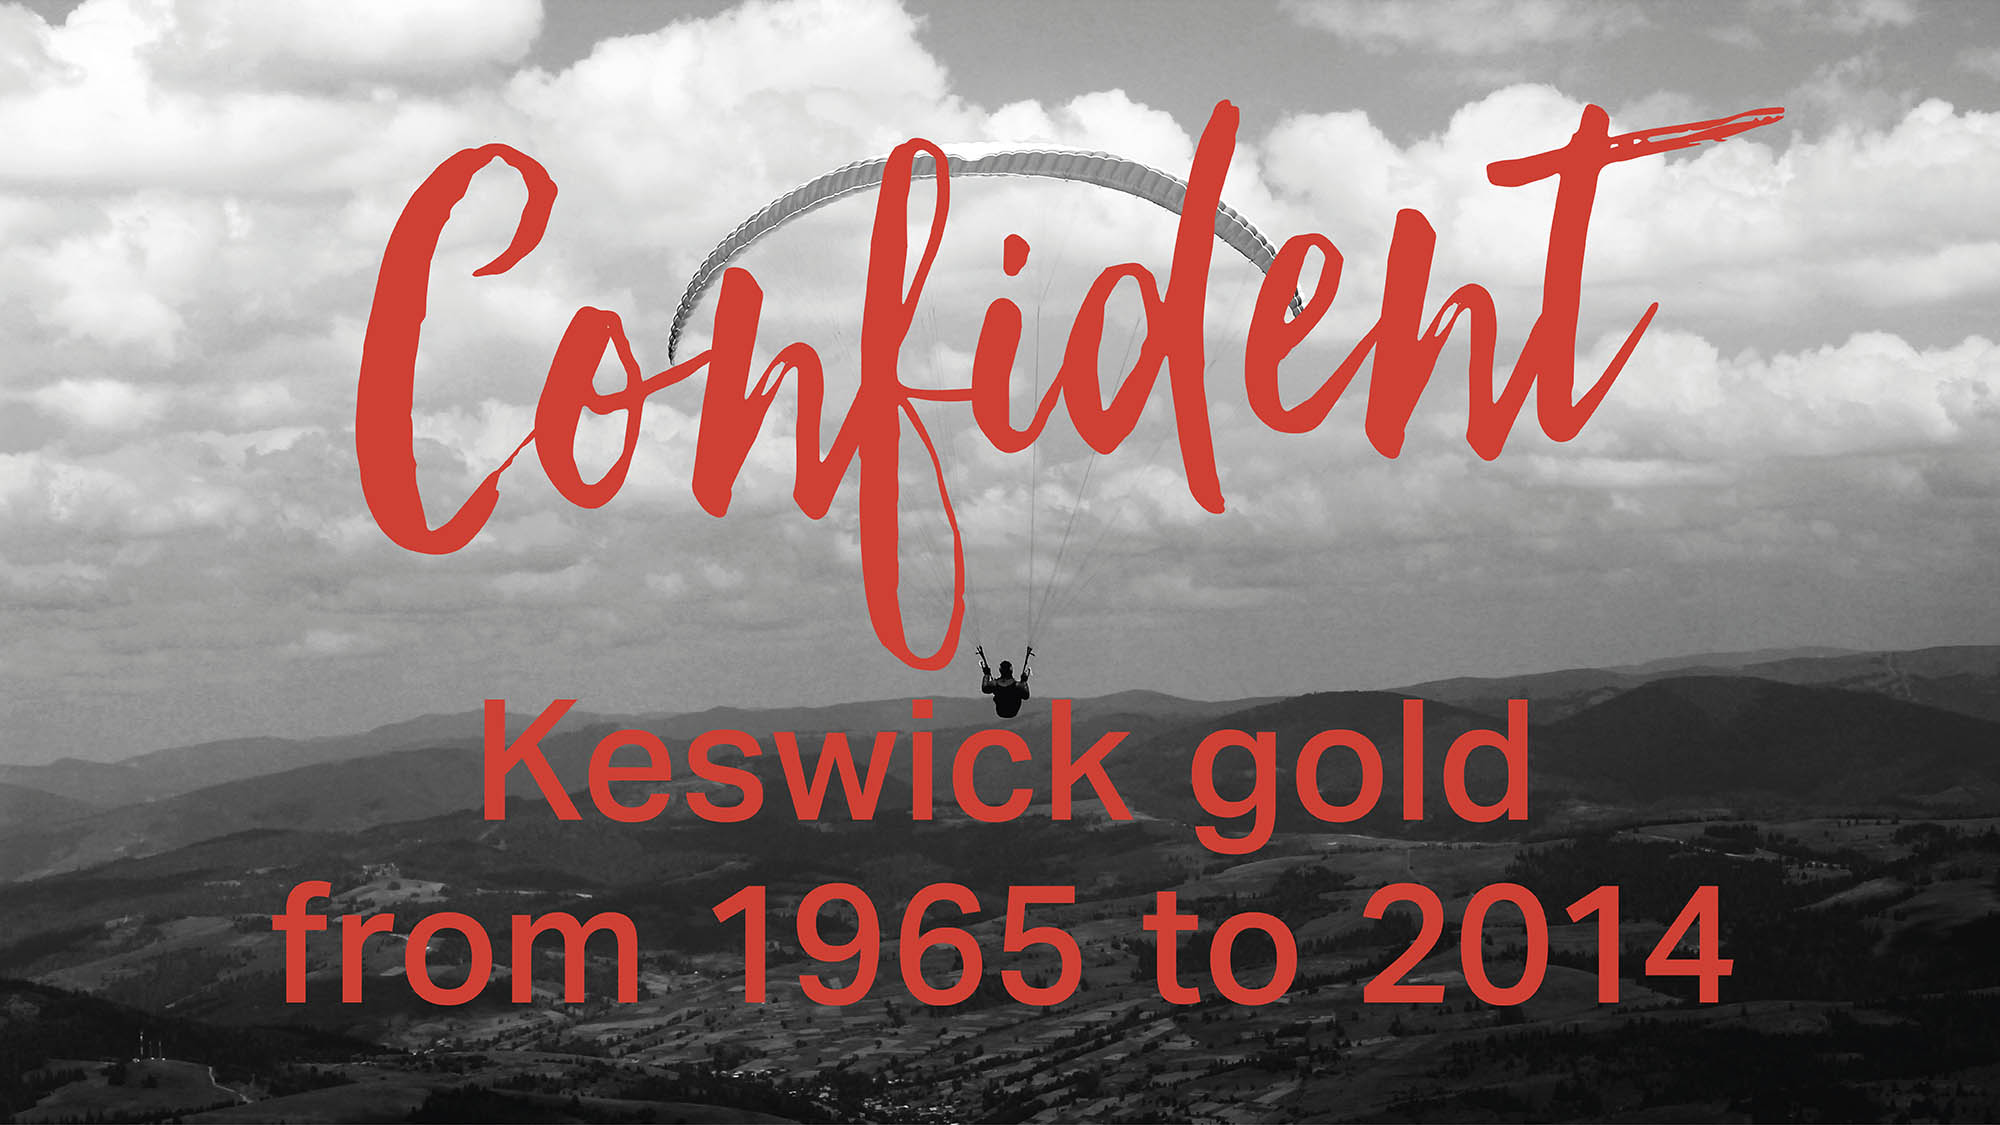 Food for the Journey: Confident. Keswick gold from 1965 to 2014